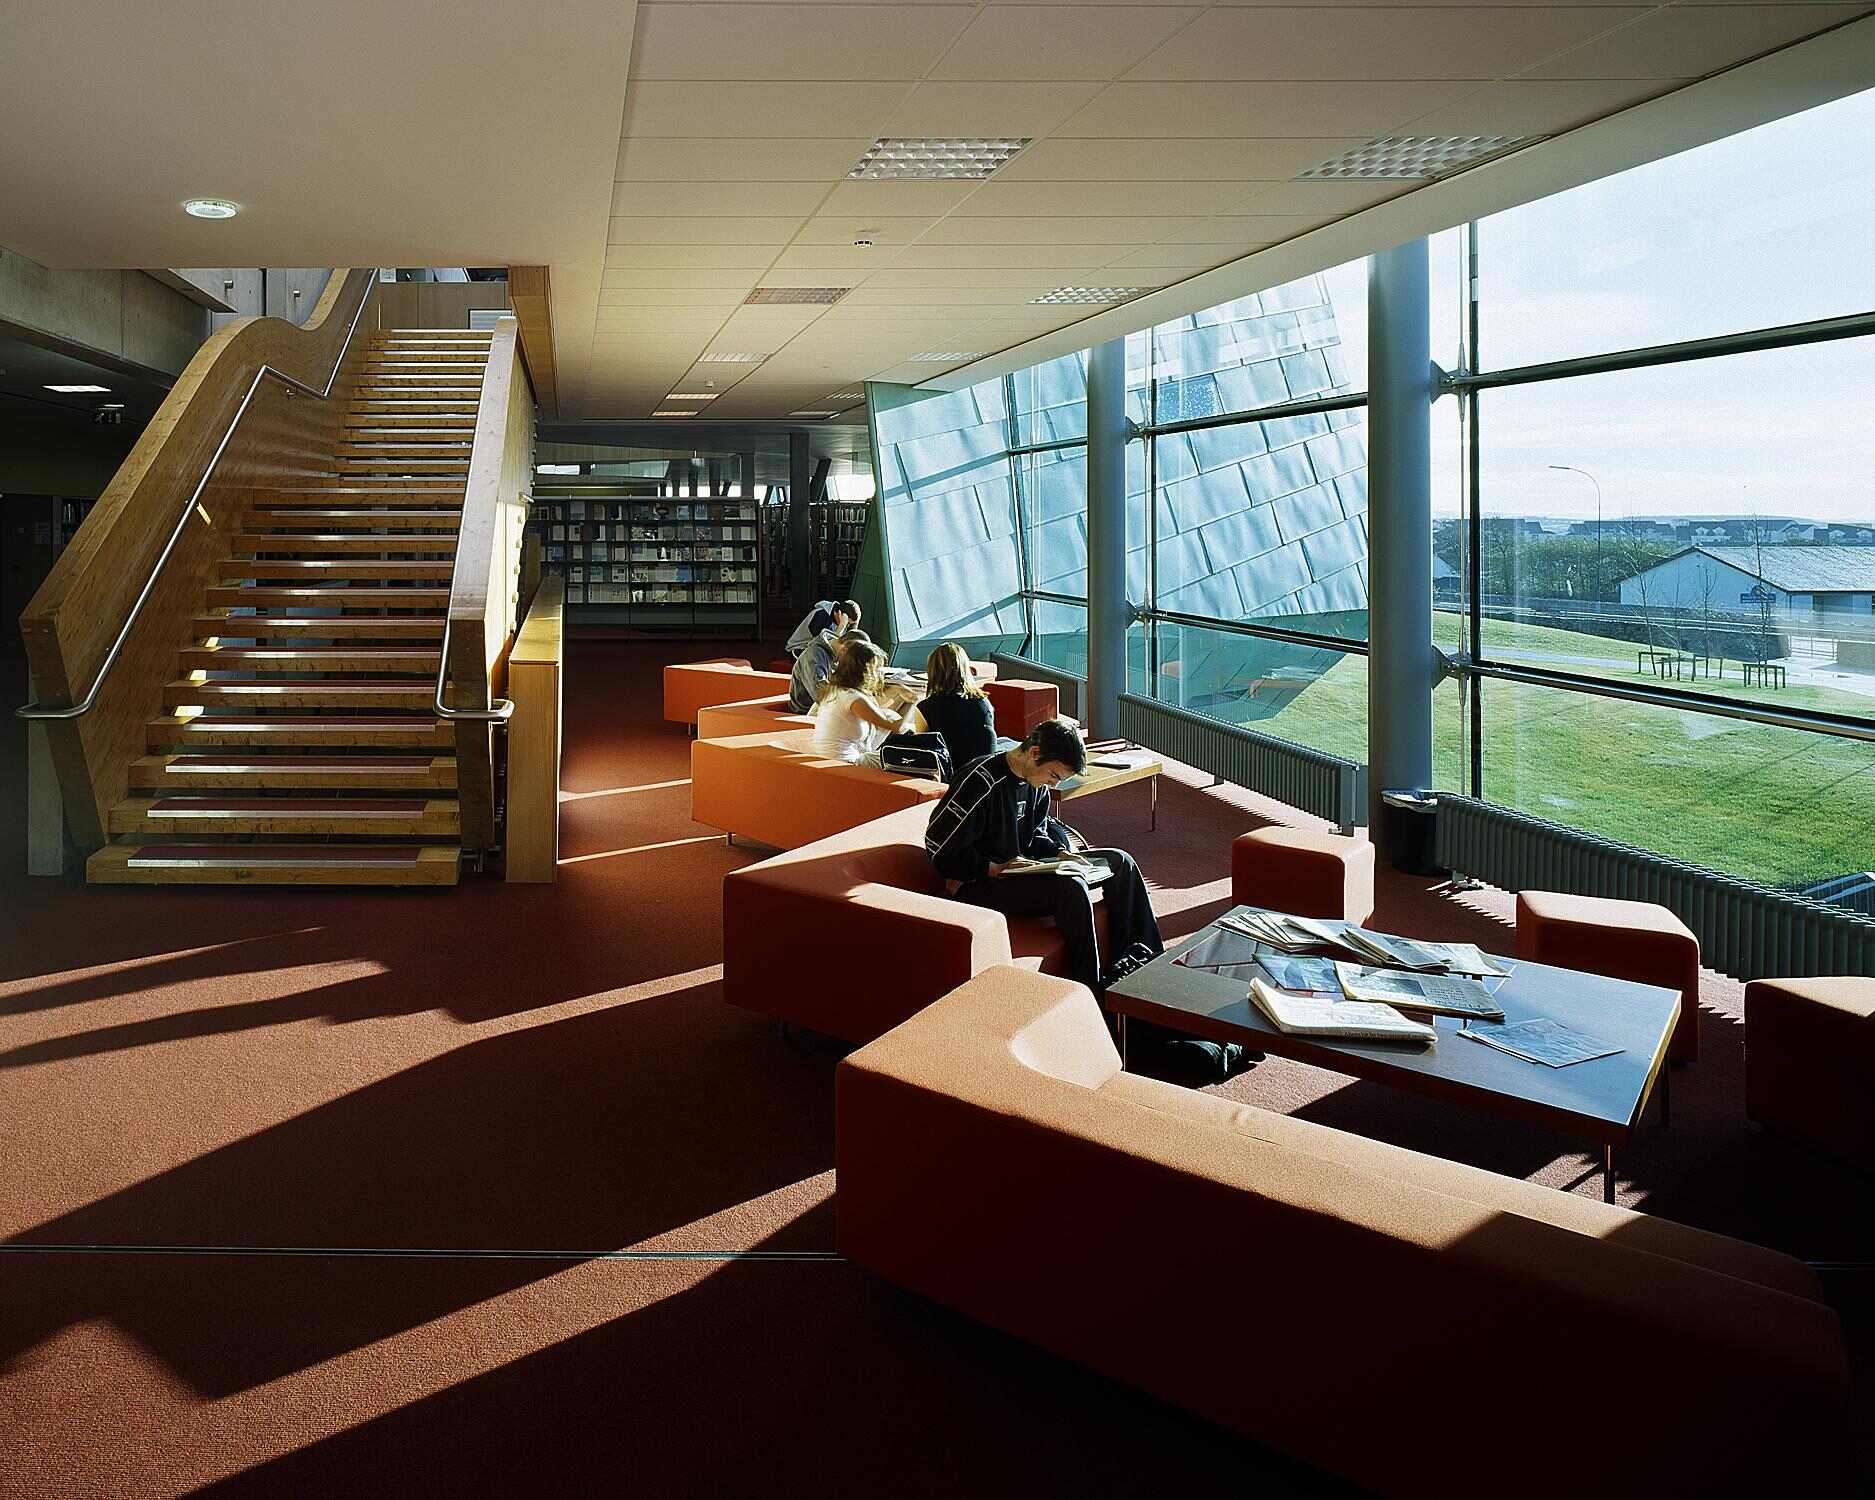 15-astonishing-facts-about-galway-mayo-institute-of-technology-library